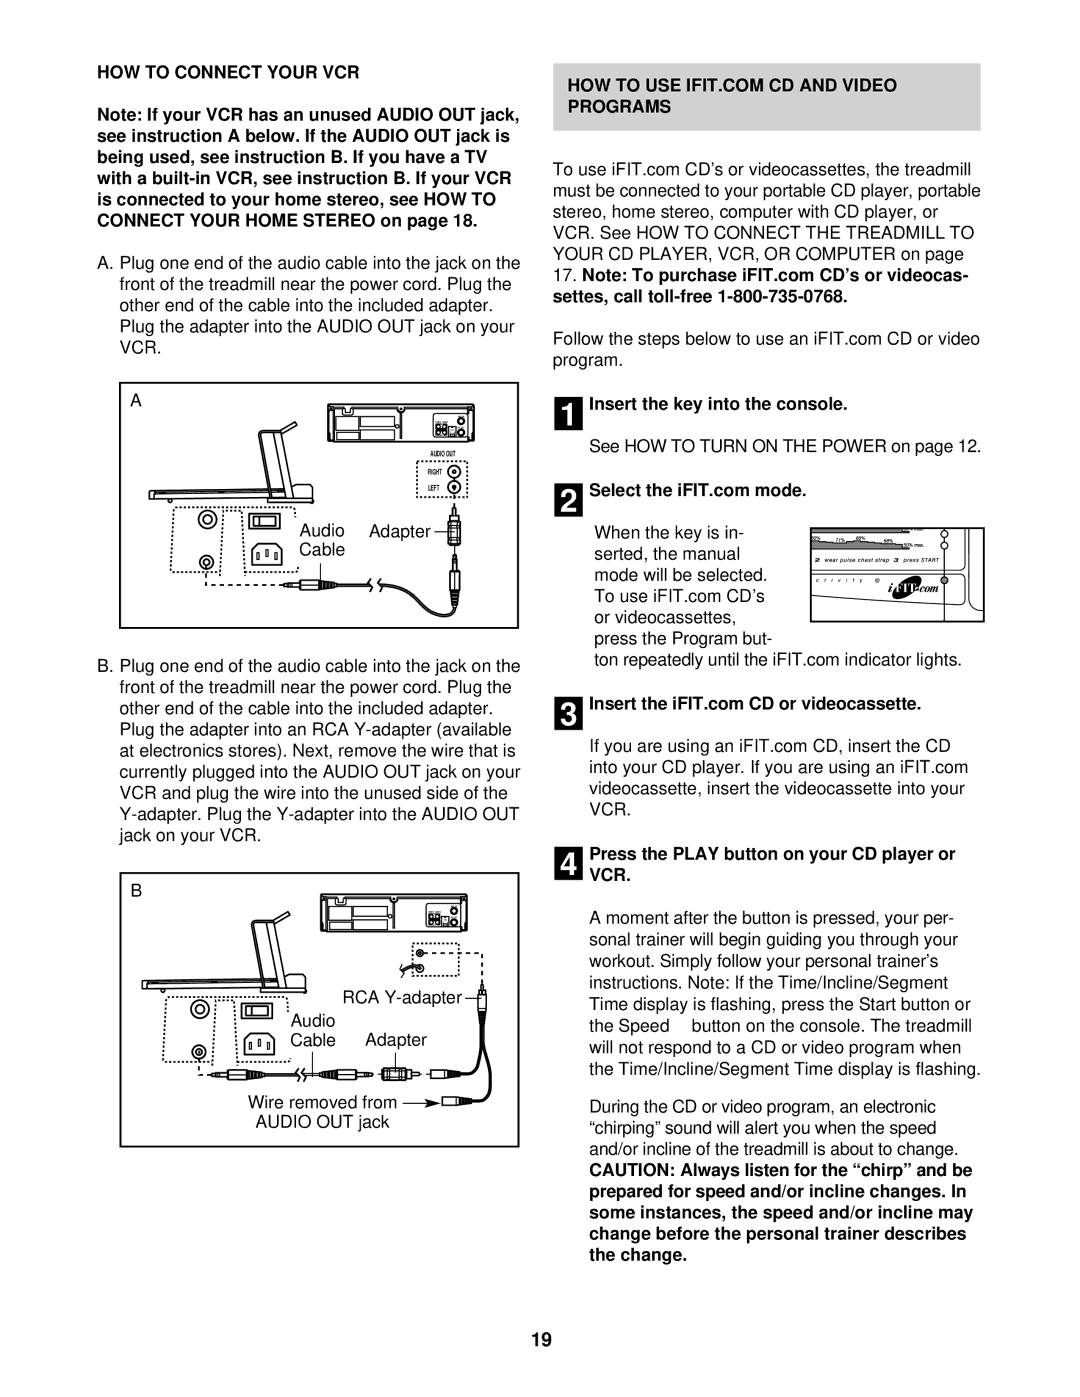 ProForm PFTL69711 user manual HOW to Connect Your VCR, Audio Adapter Cable, Insert the key into the console 